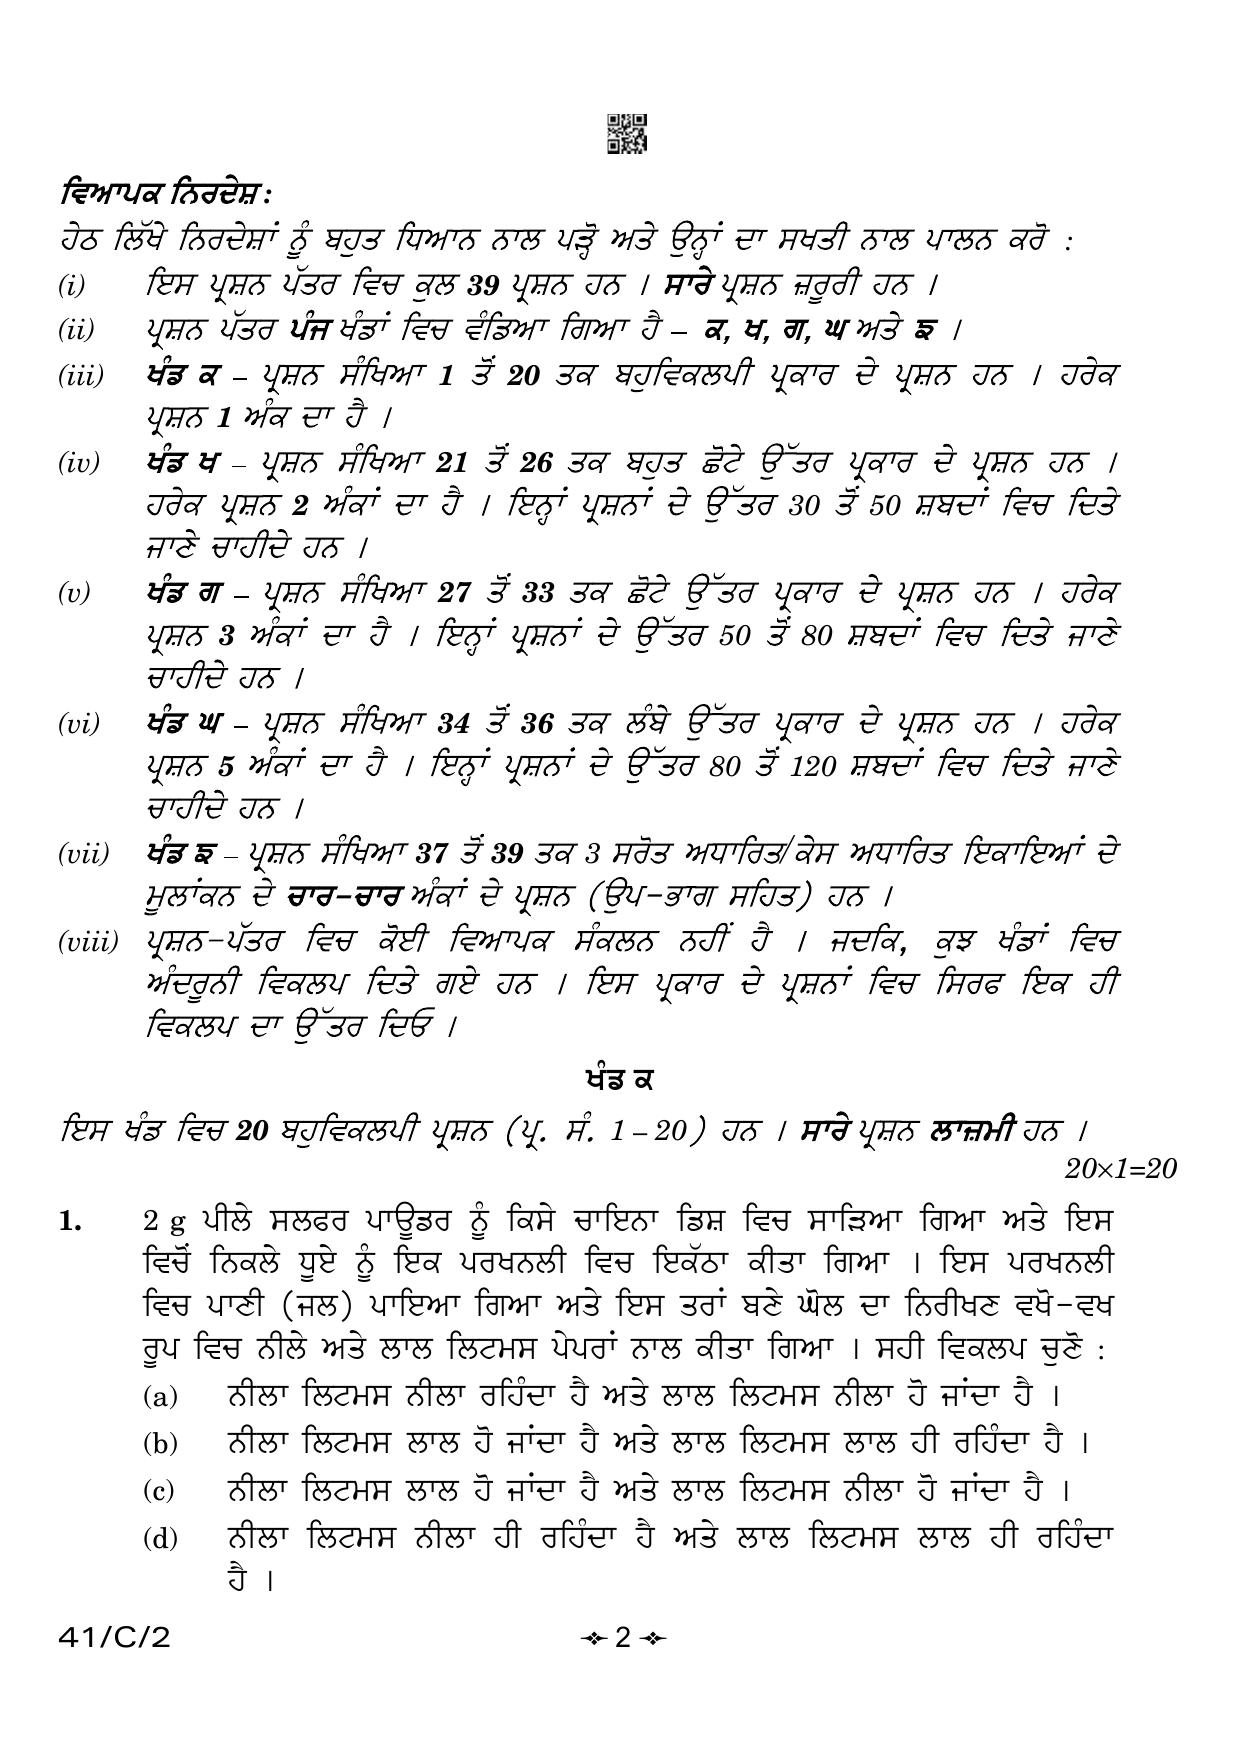 CBSE Class 10 41-2 Science Punjabi 2023 (Compartment) Question Paper - Page 2